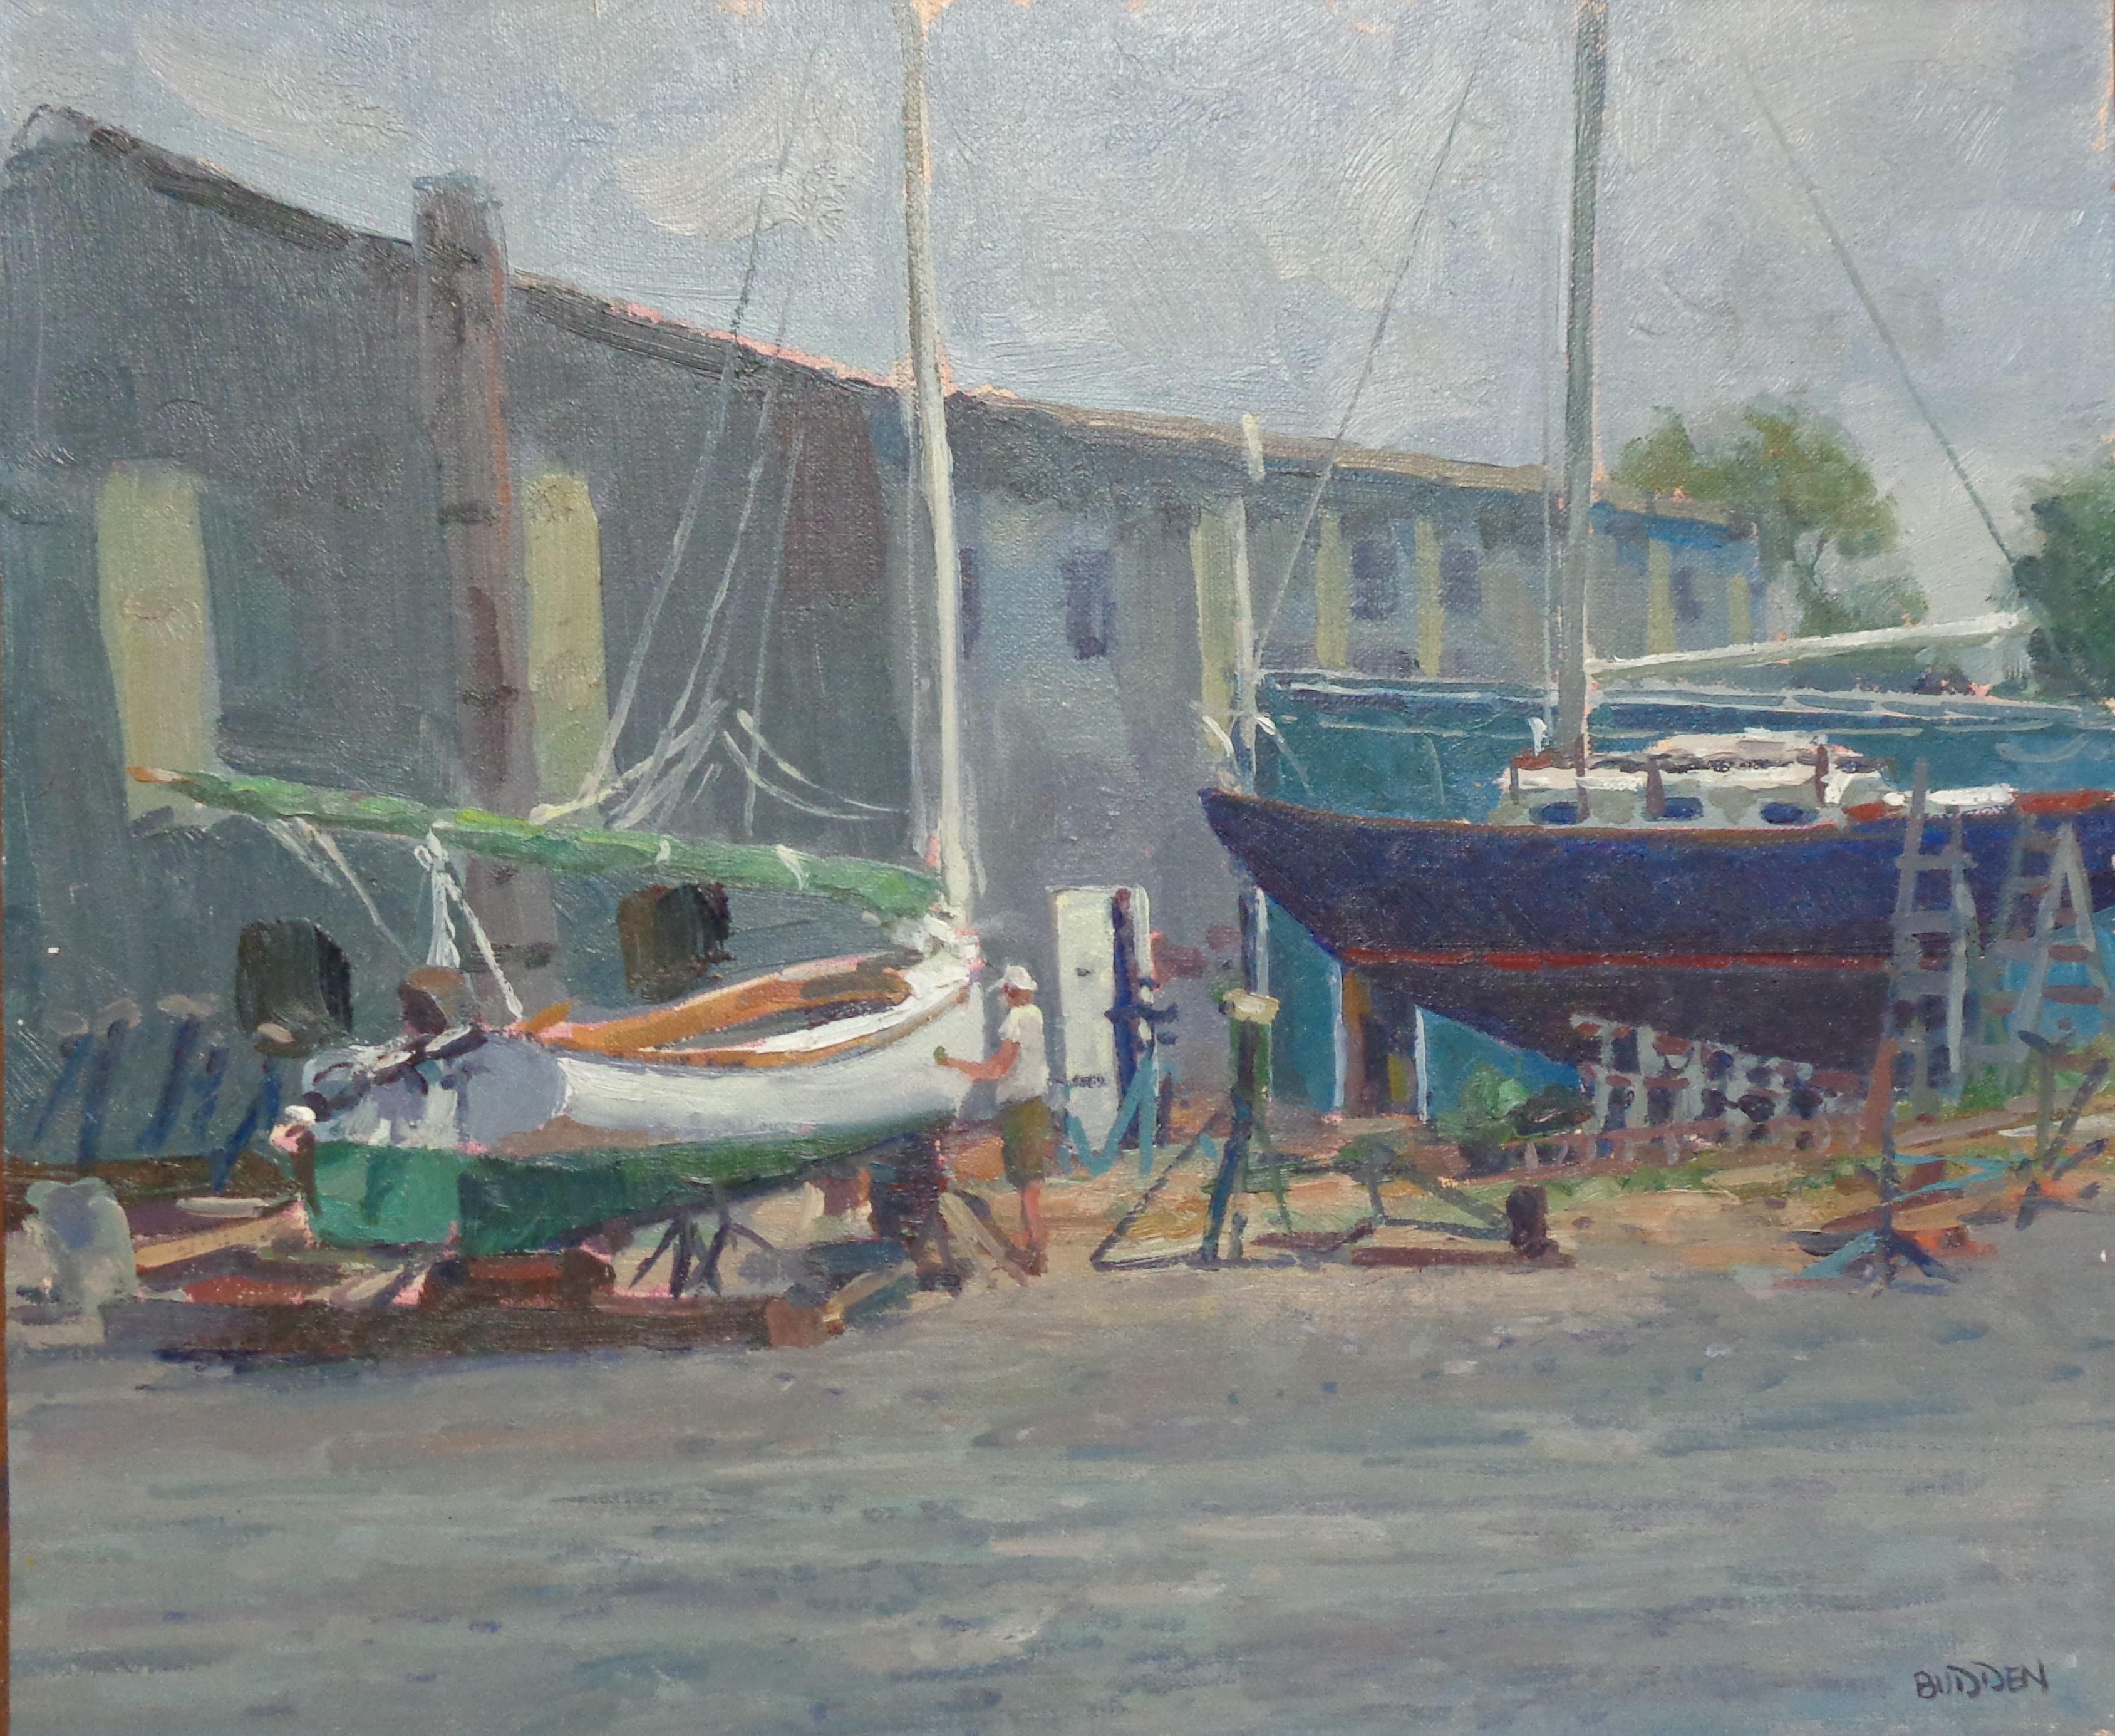 Lowery's Legacy  is a plein air oil painting on canvas panel by award winning contemporary artist Michael Budden that showcases a view of a worker working on his boat at Lowery's Boat yard on Tilghman island Md . Painted on location  back in 2008